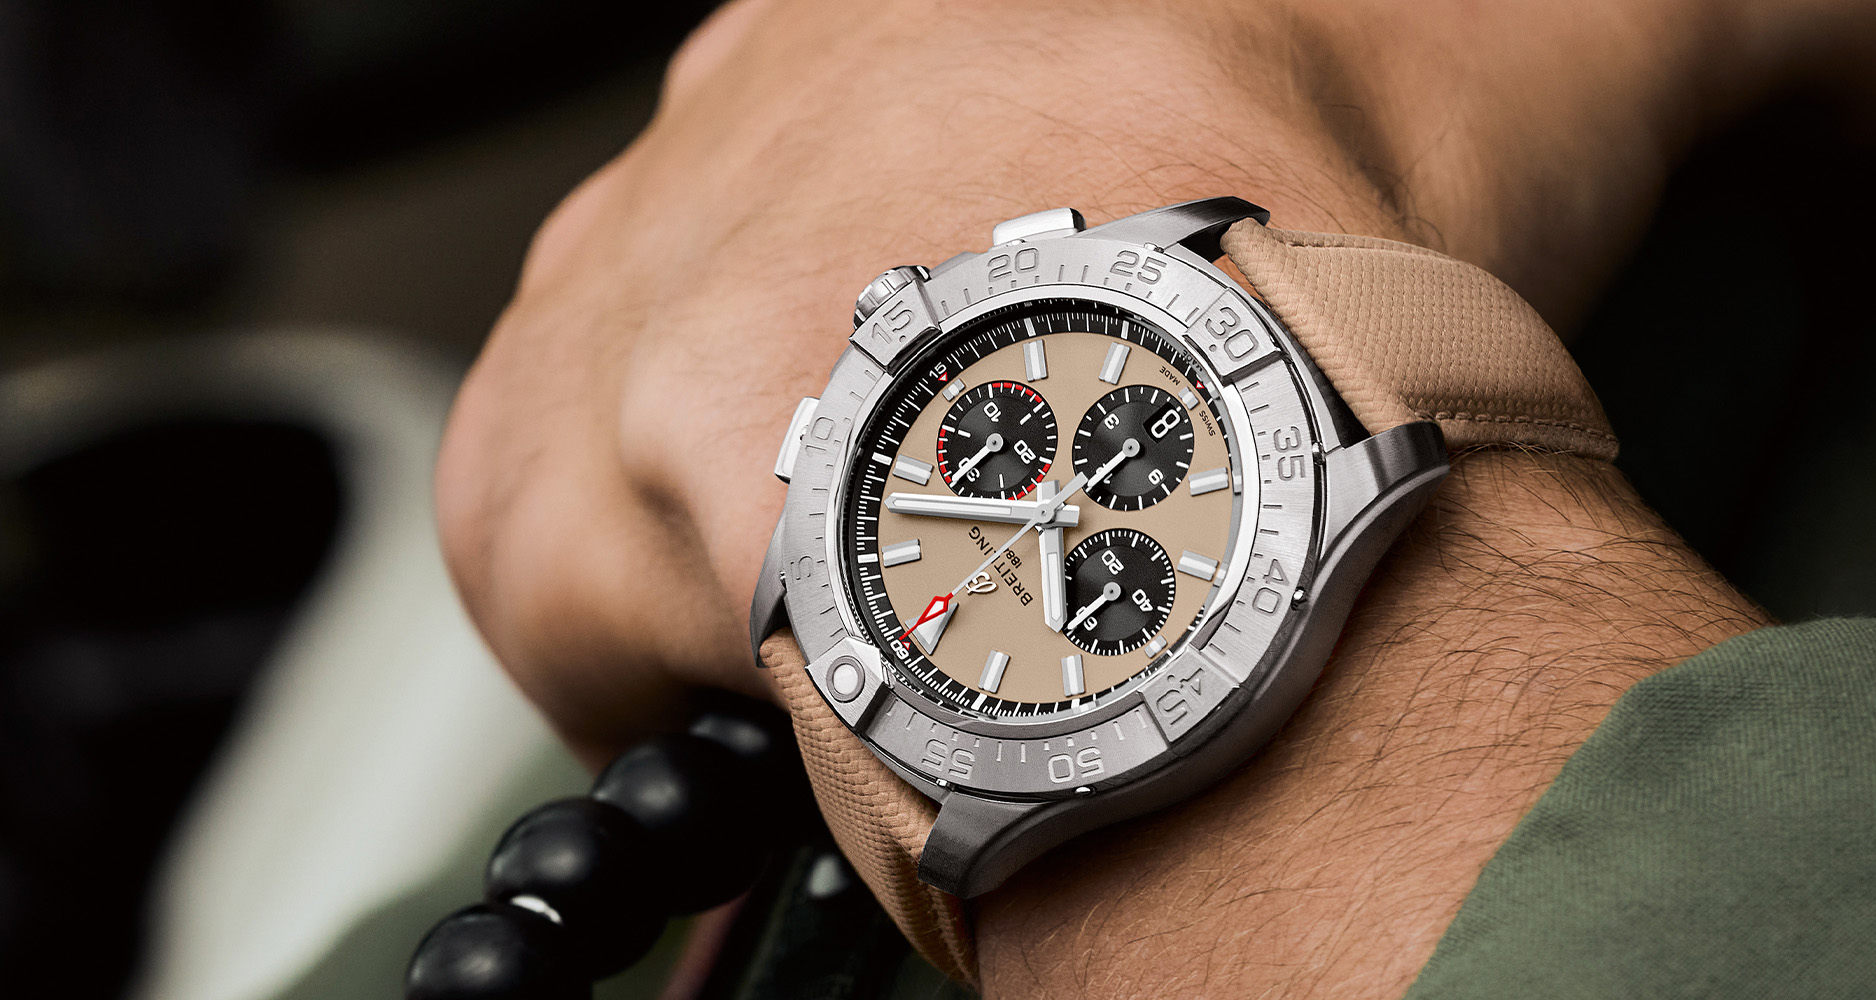 The Breitling Avenger B01 Chronograph 44 with sand dial on the wrist of a Patrouille Suisse pilot.